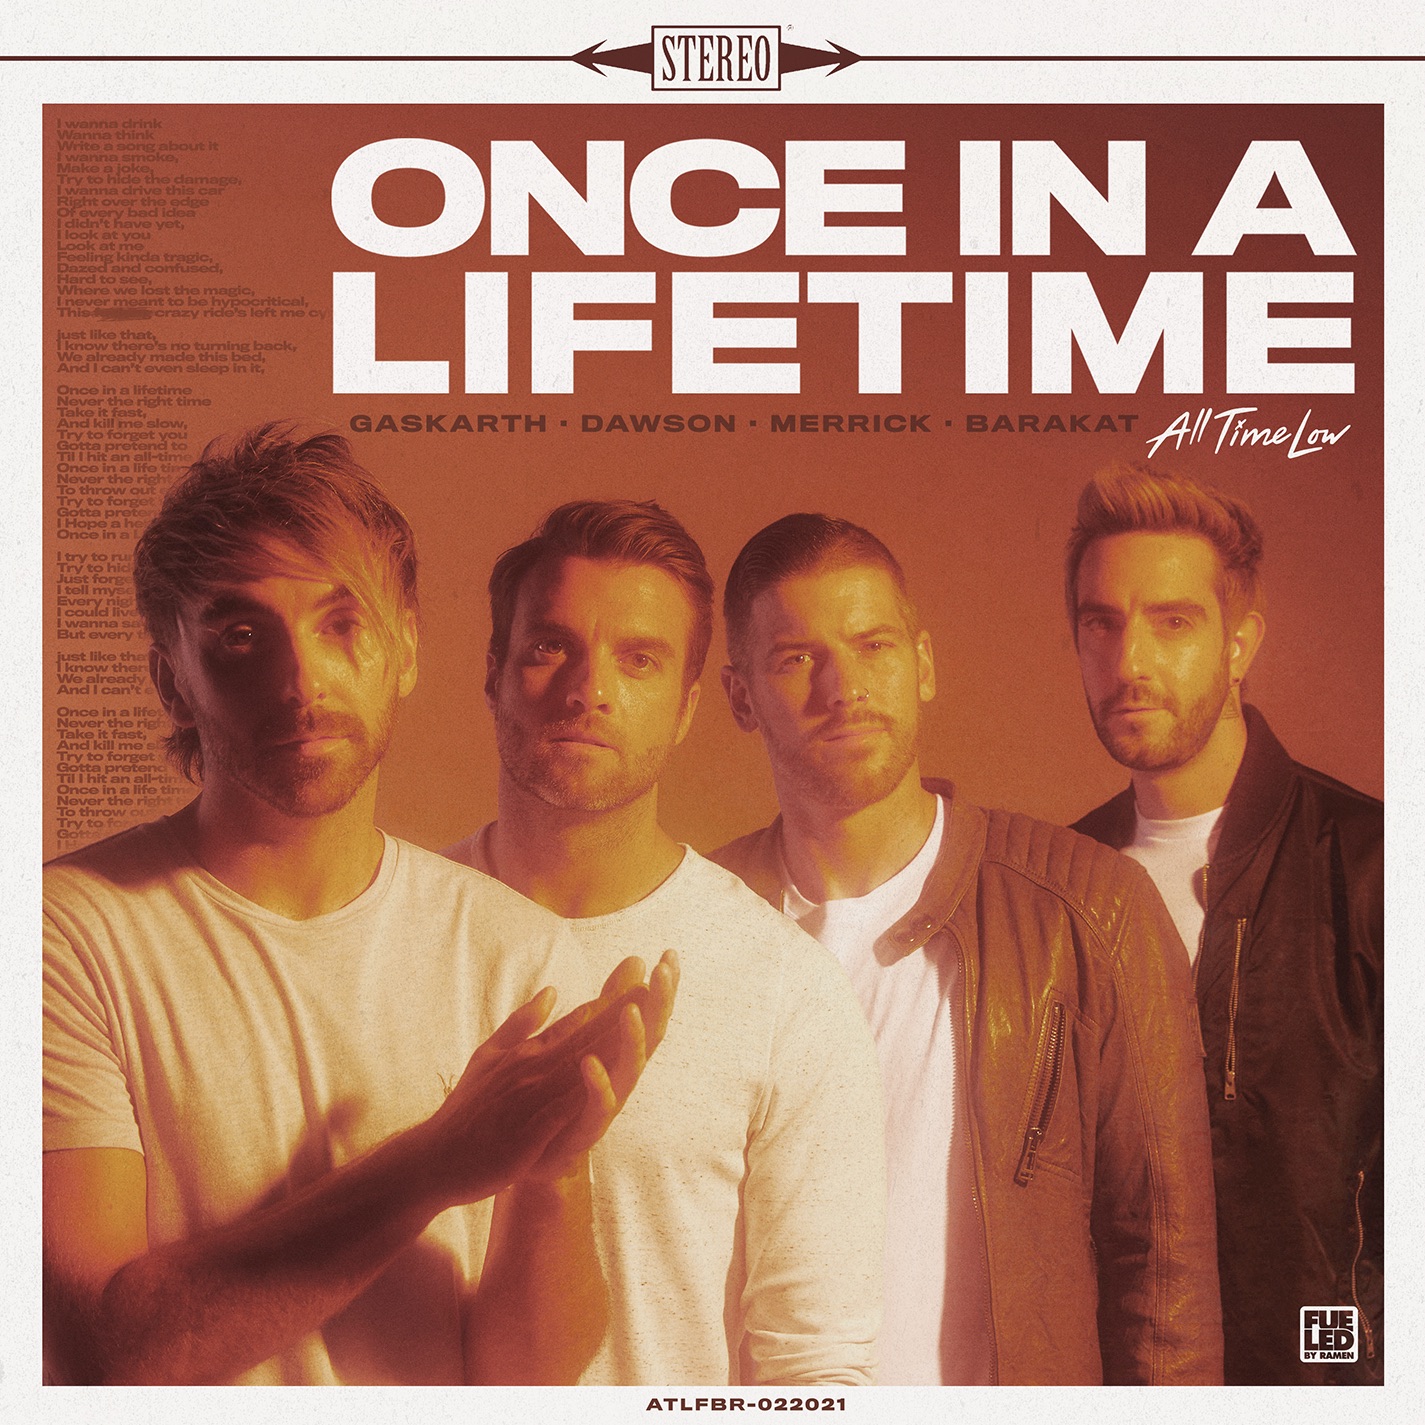 All Time Low - Once In A Lifetime - Single